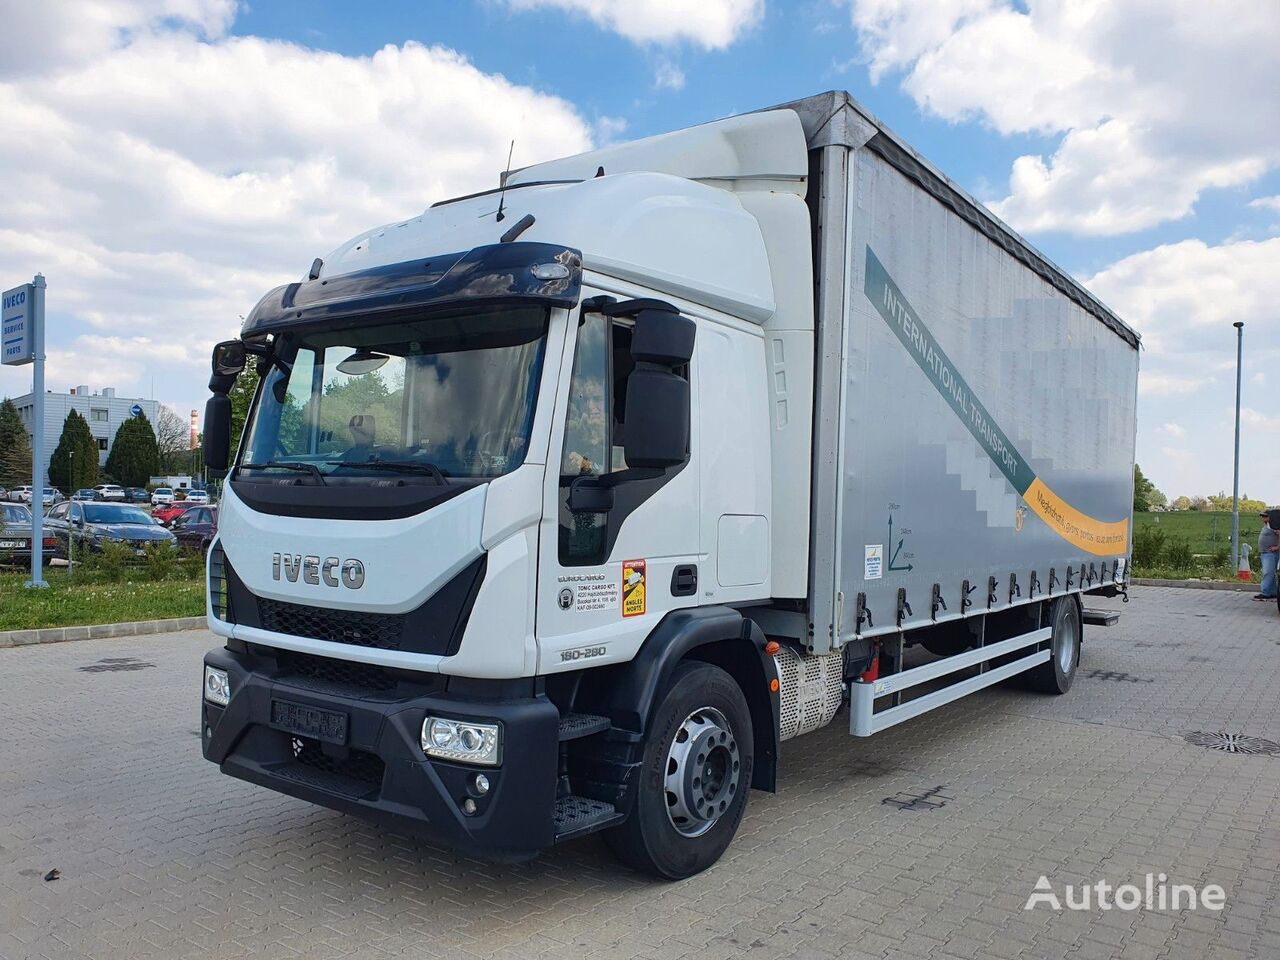 IVECO 180 E 280  curtainsider truck